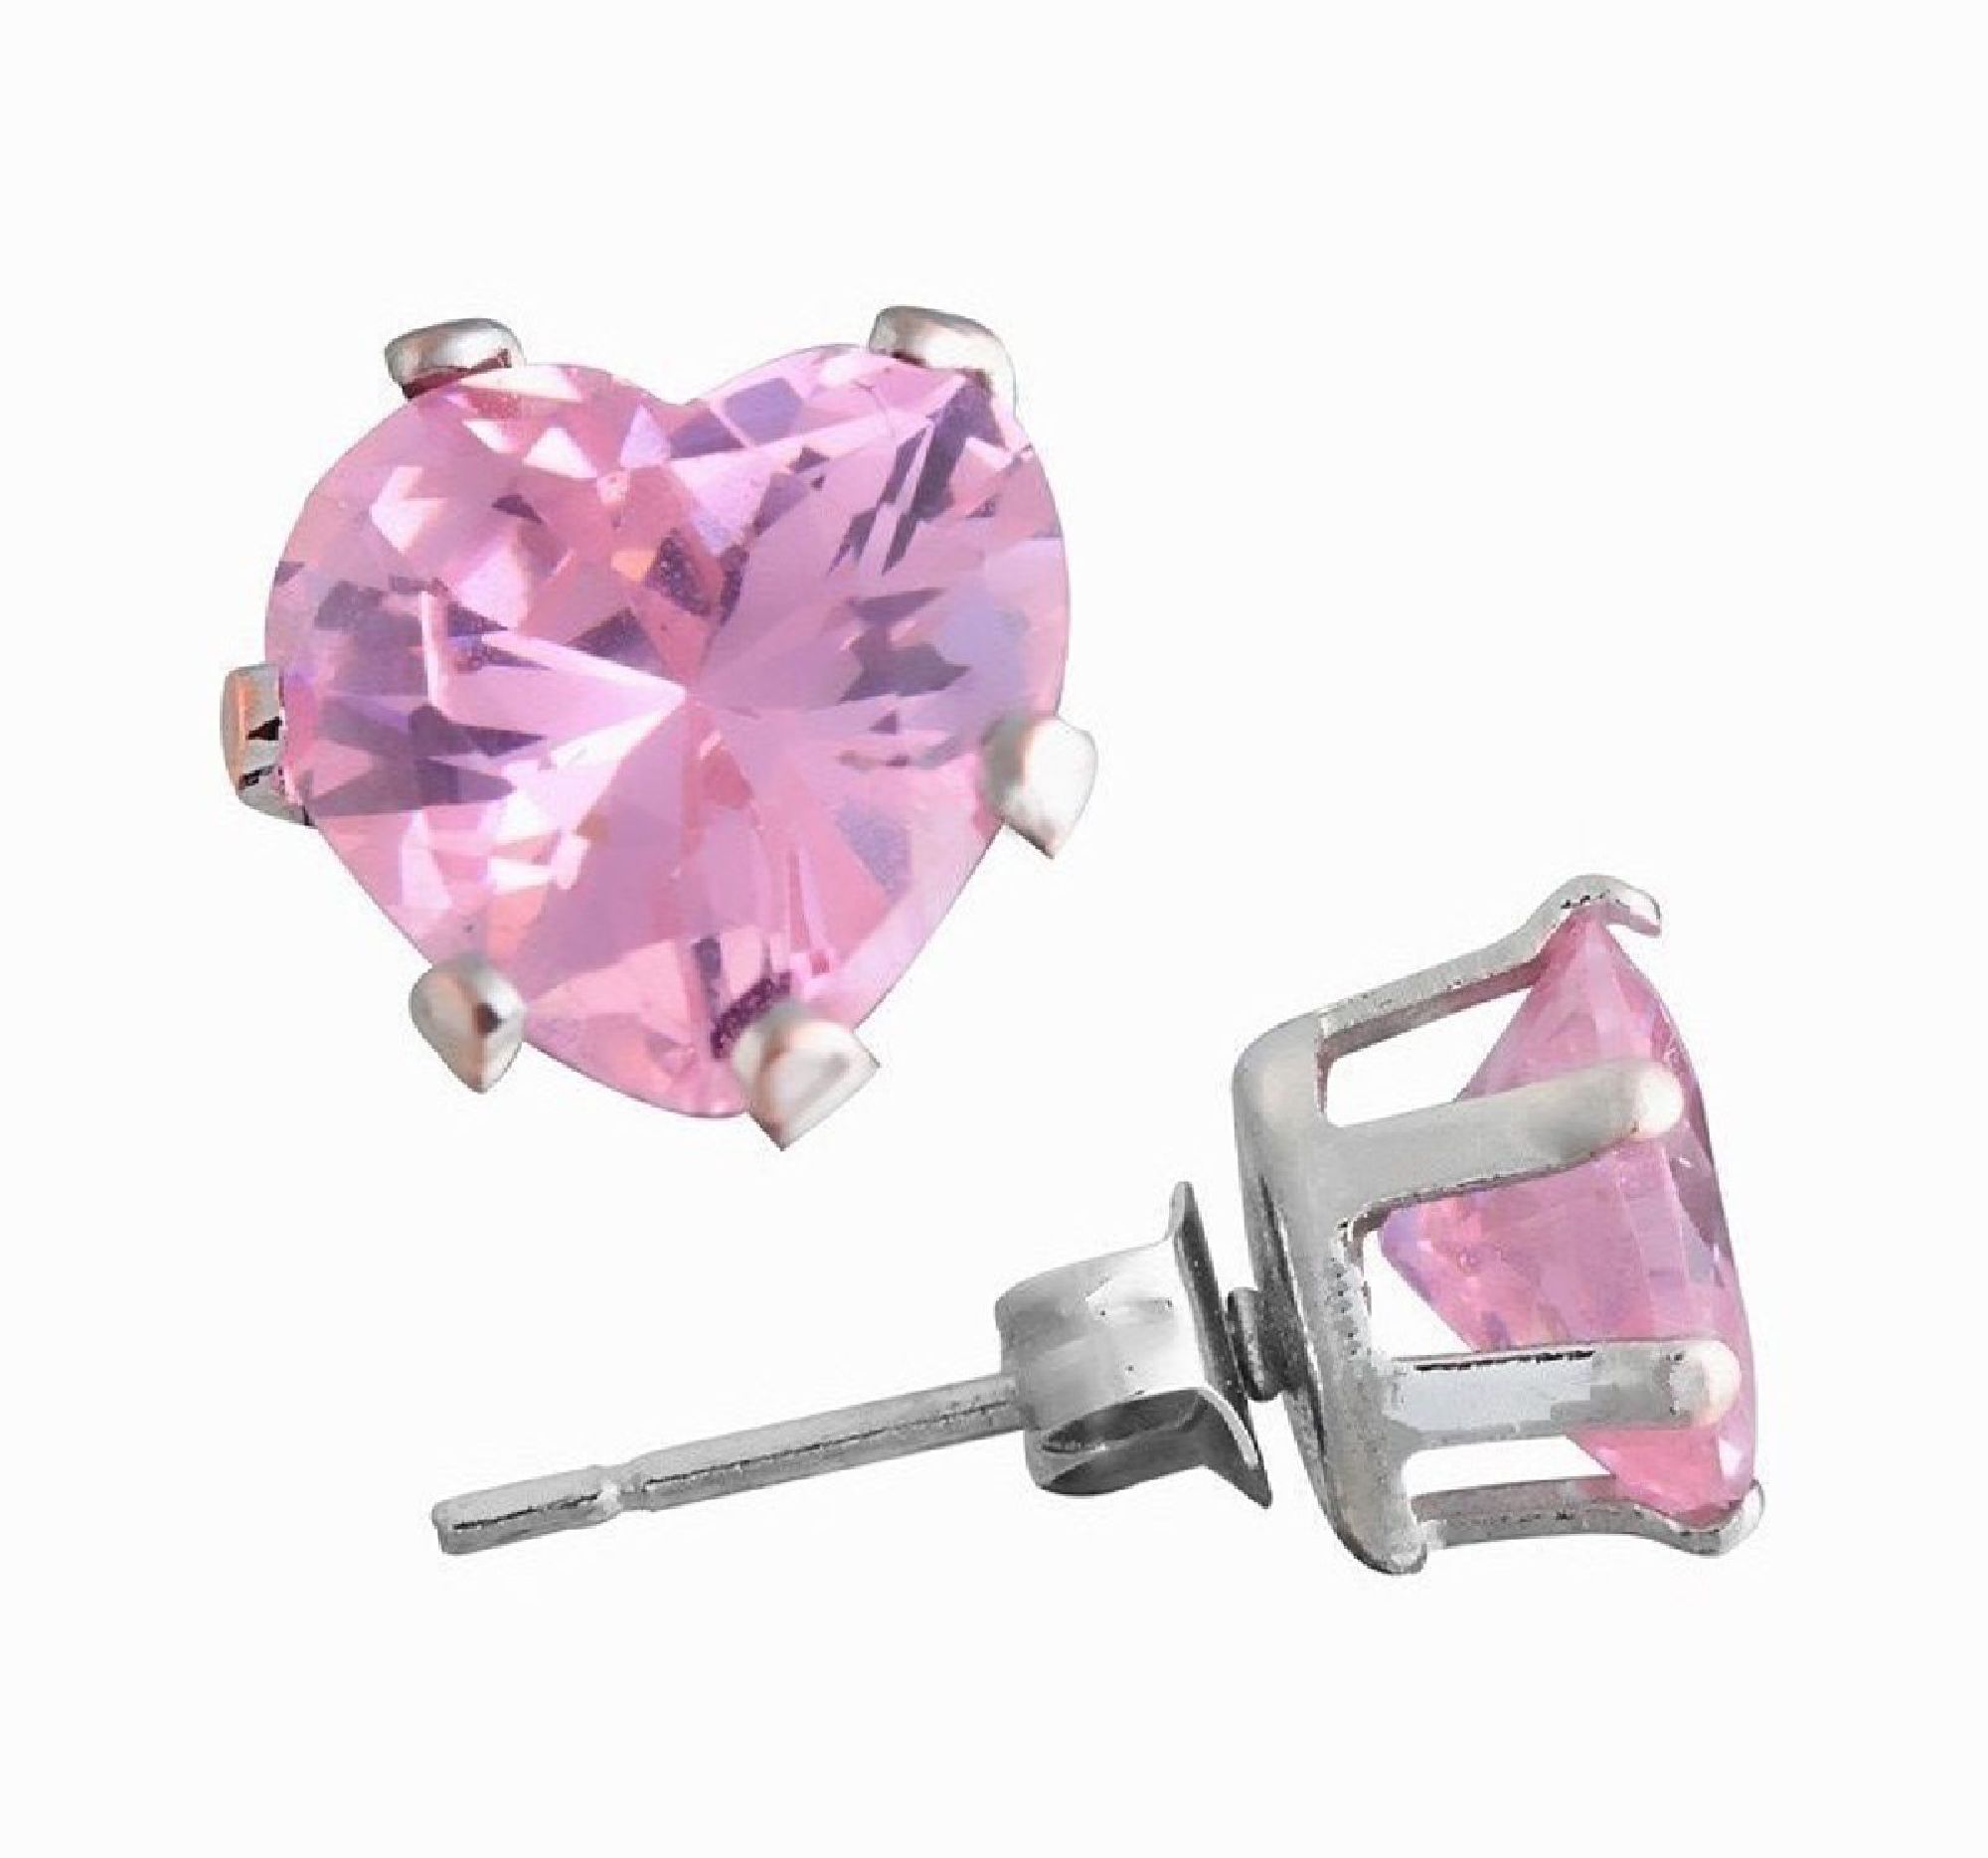 ParisJewelry.com 3 Carat Heart Shape Pink Diamond manmade Stud Earrings for Men in Platinum over Sterling Silver Designed in France